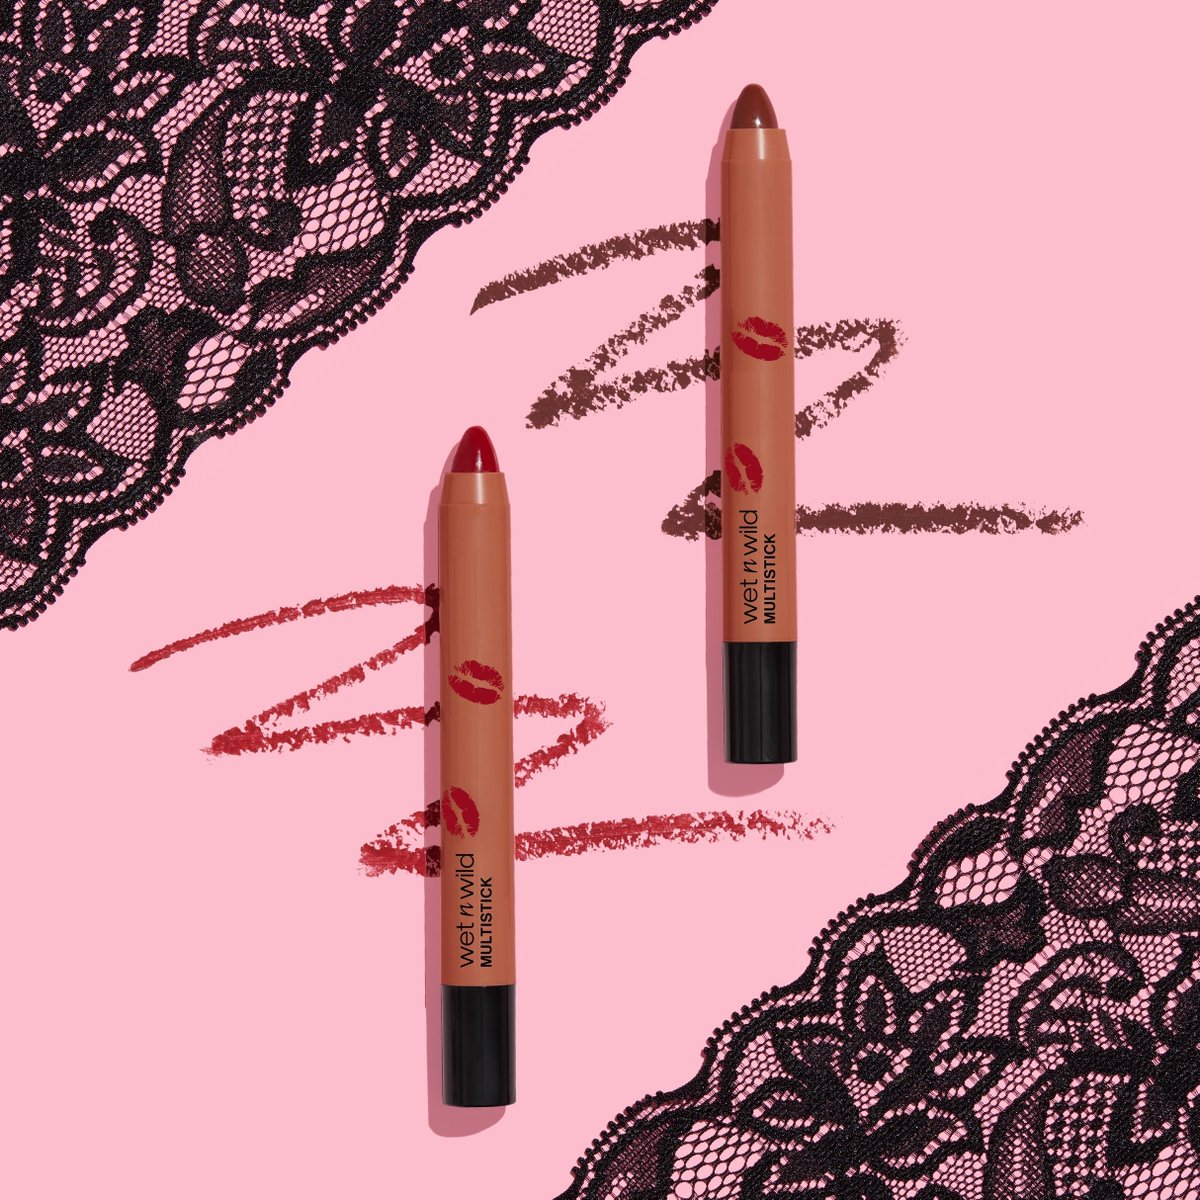 Take charge with 'Tease then Dominate' Multistick Set, with two bold shades that will add drama to any look 😏⁠ ⁠ Get the collection @amazon @cvspharmacy wetnwildbeauty.com and shop our #Amazon store at #LinkInBio #wnwDateOrDominate #wetnwildbeauty #crueltyfree